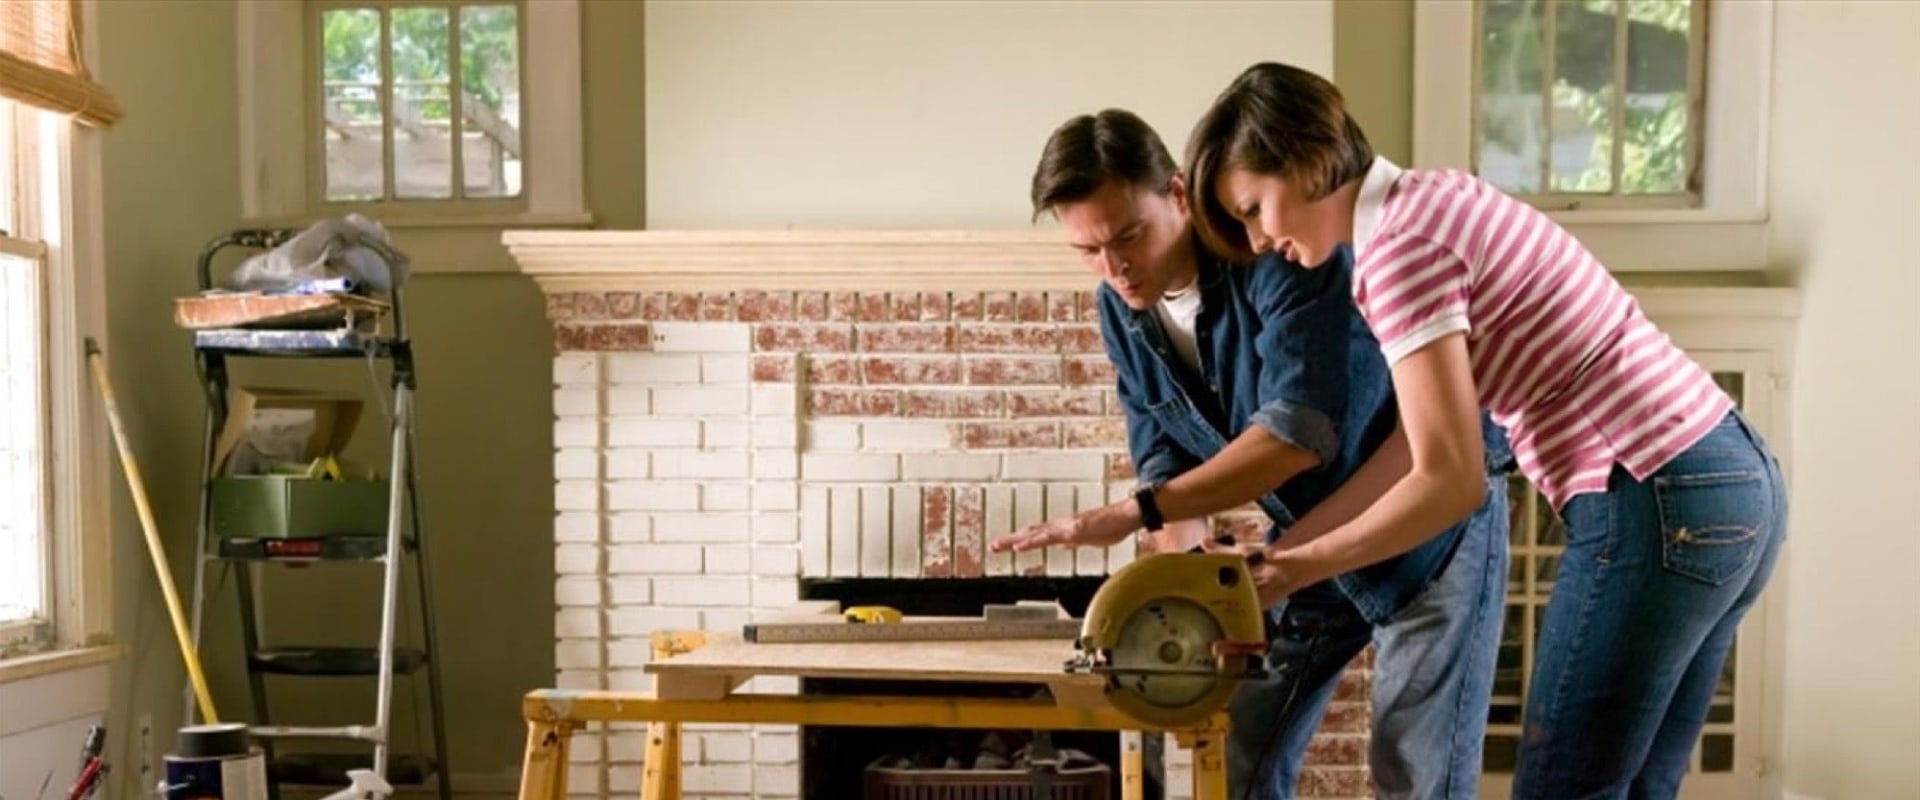 Updating an Existing Home: Tips and Advice for Residential Construction and Remodeling